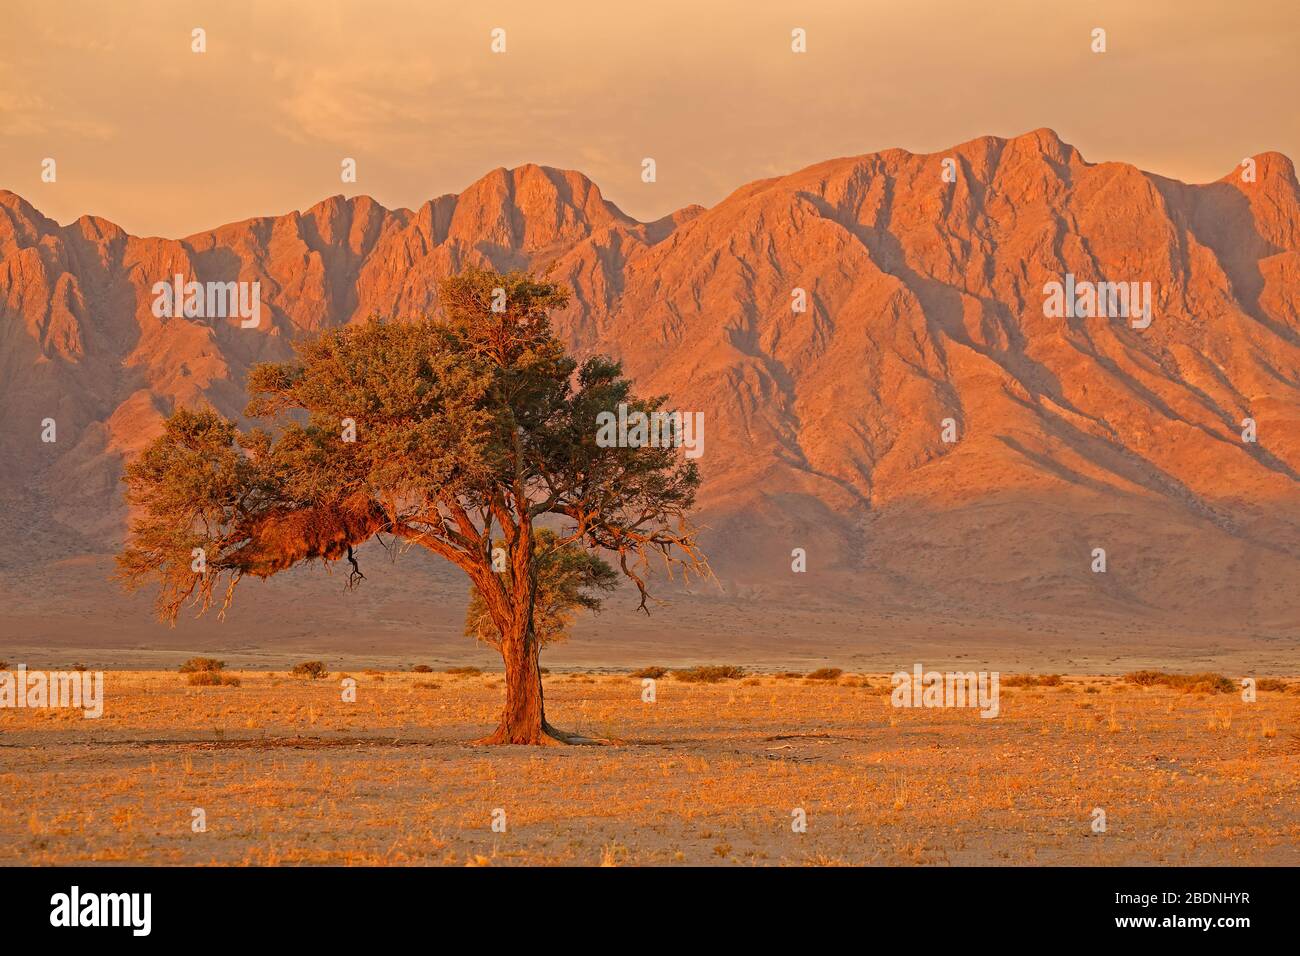 Namib desert landscape at sunset with rugged mountains and thorn tree, Namibia Stock Photo